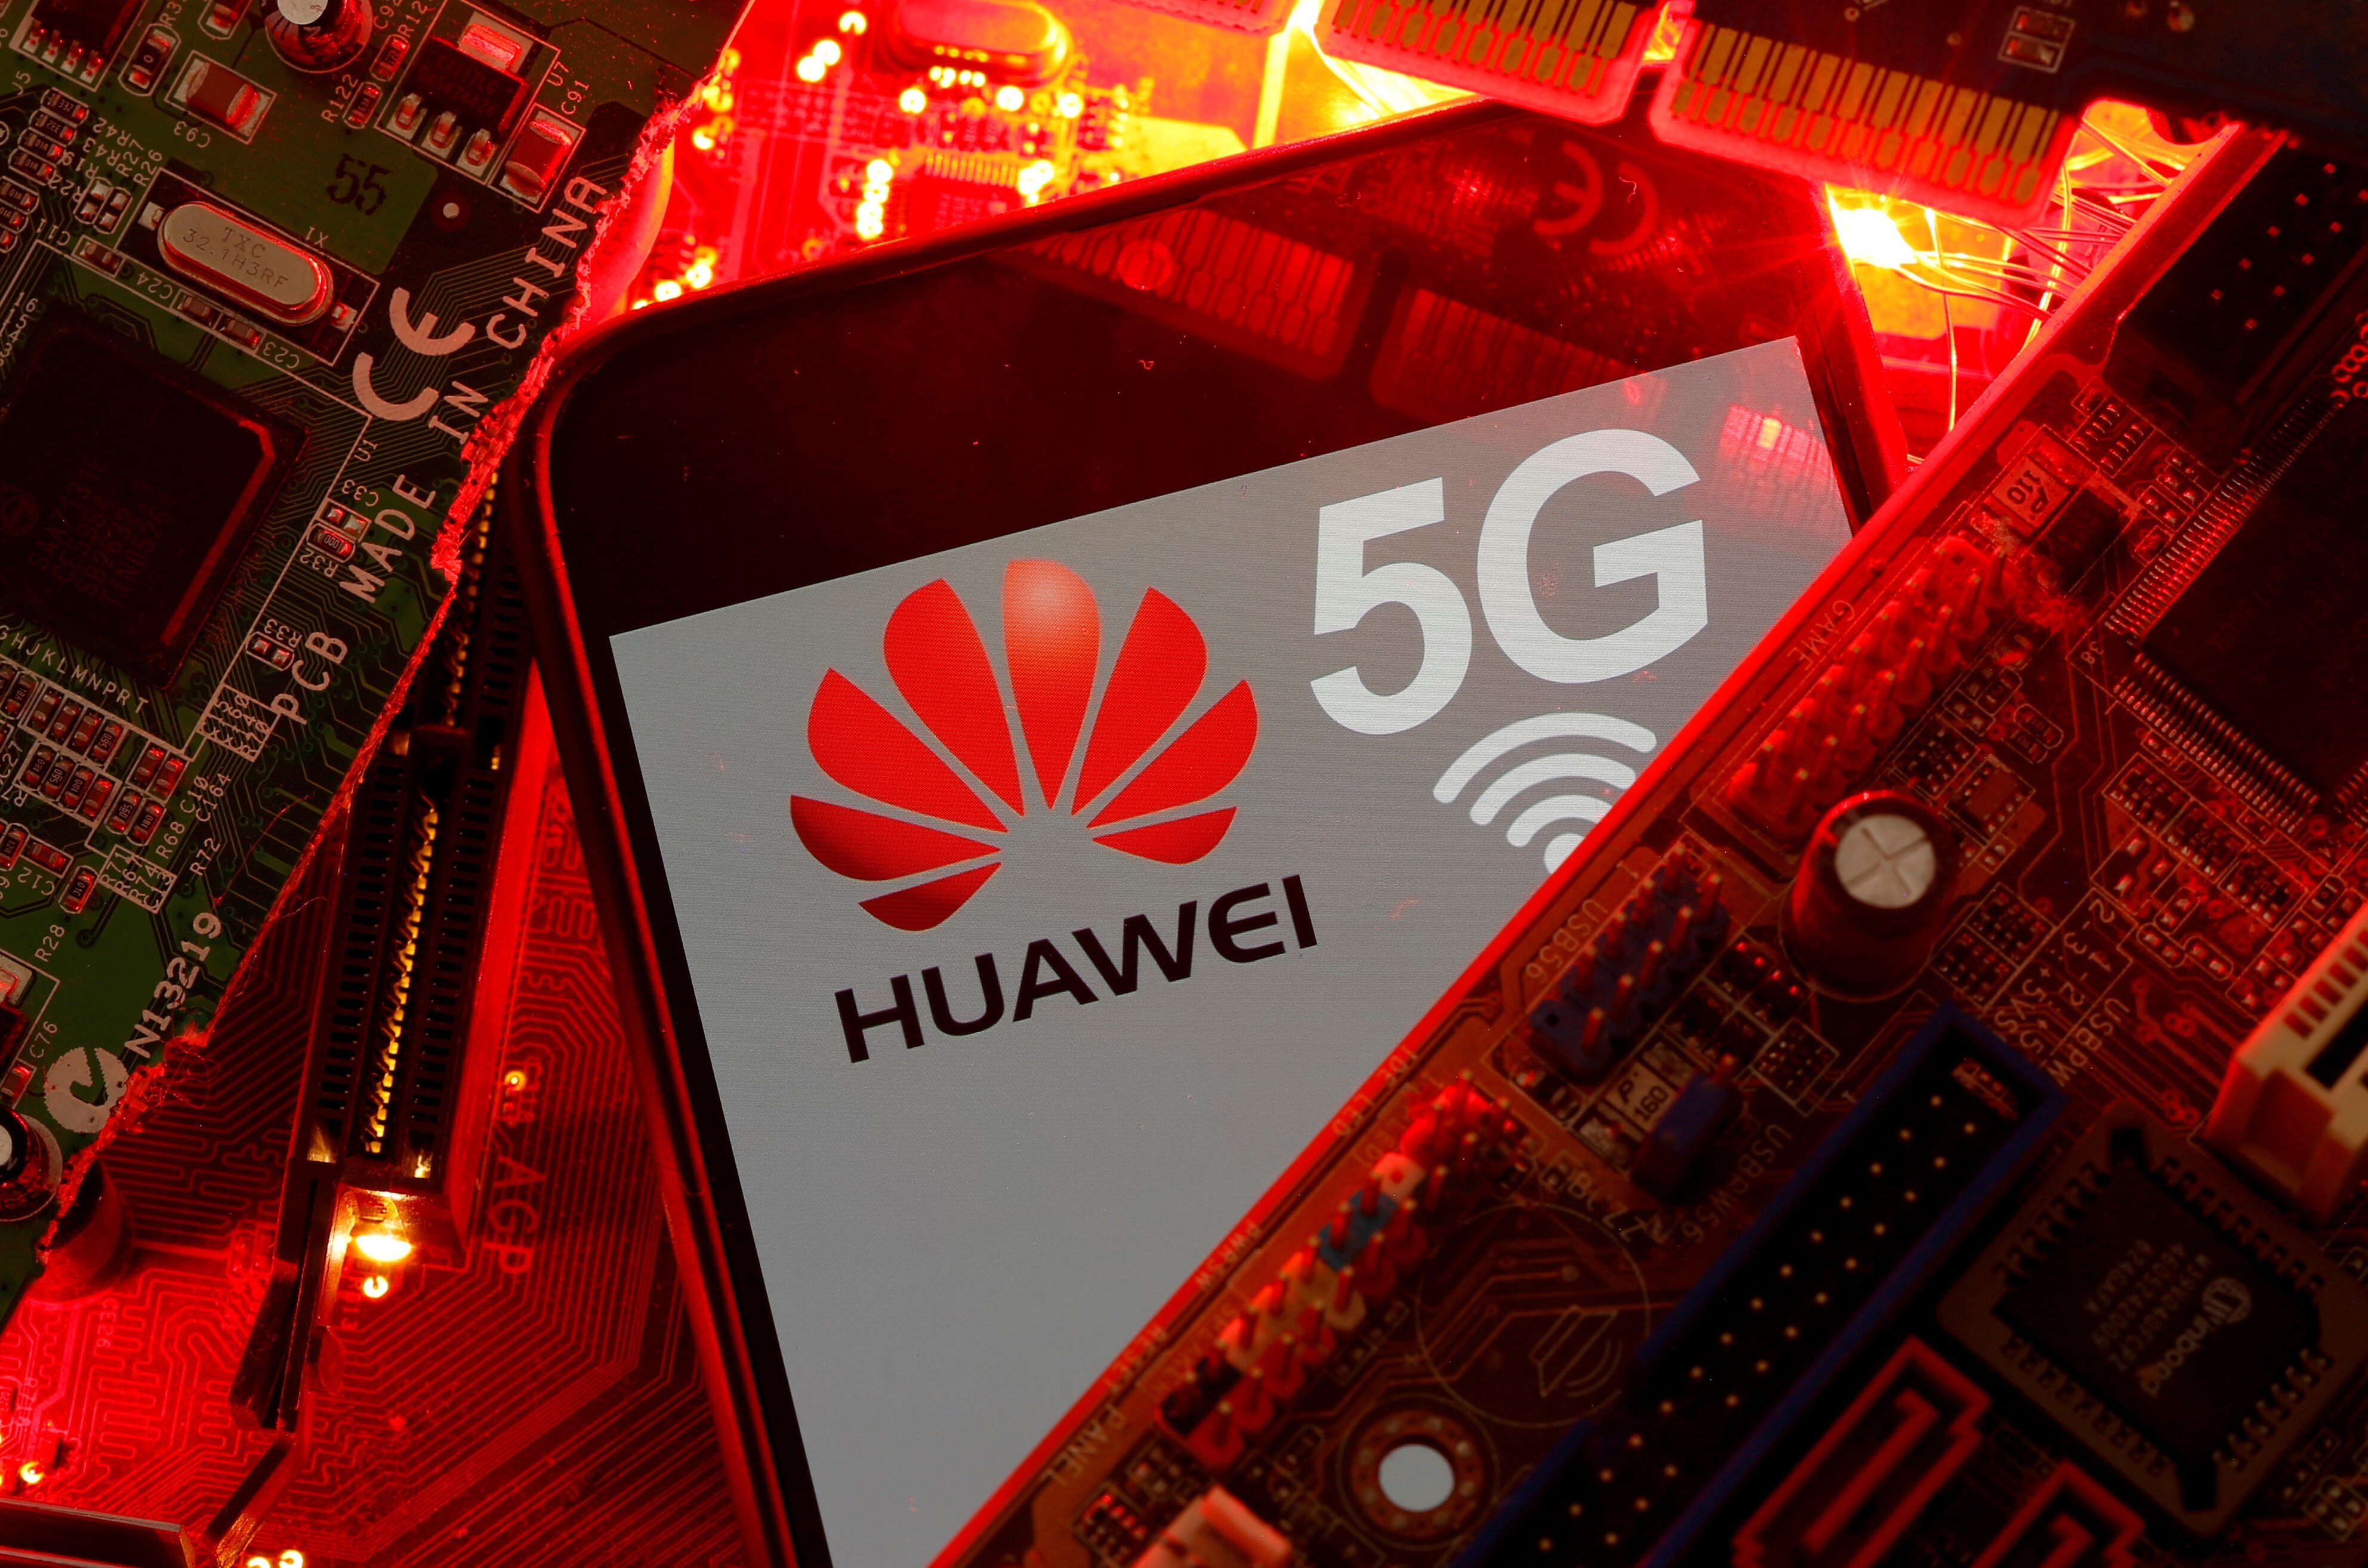 Southeast Asia’s market for 5G equipment is still dominated by Huawei and ZTE, but European vendors Ericsson and Nokia have made inroads. Photo: Reuters